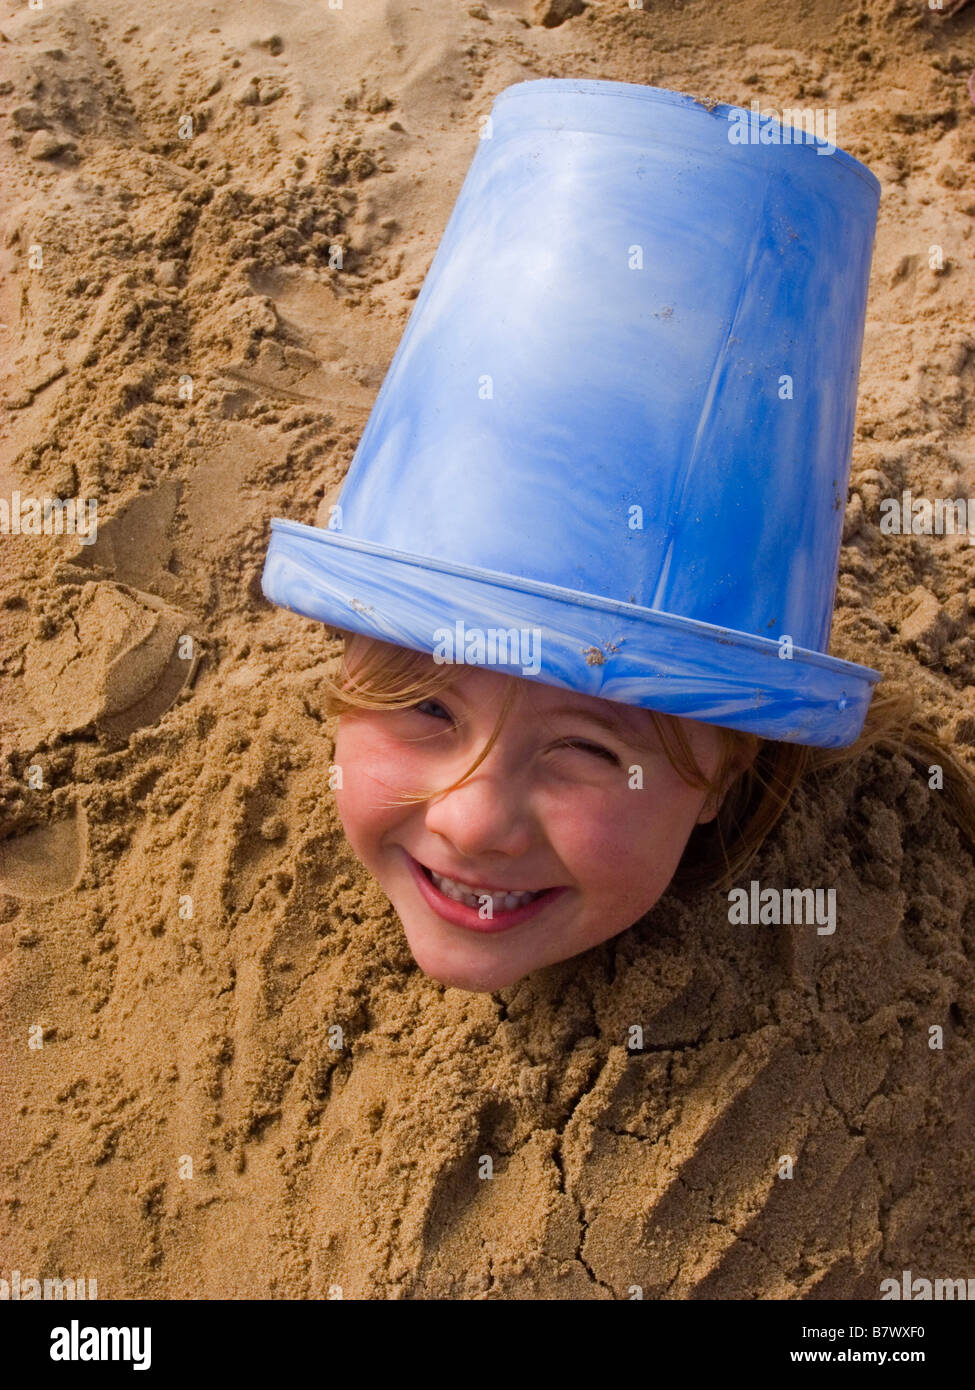 Bury Head In Sand High Resolution Stock Photography and Images - Alamy